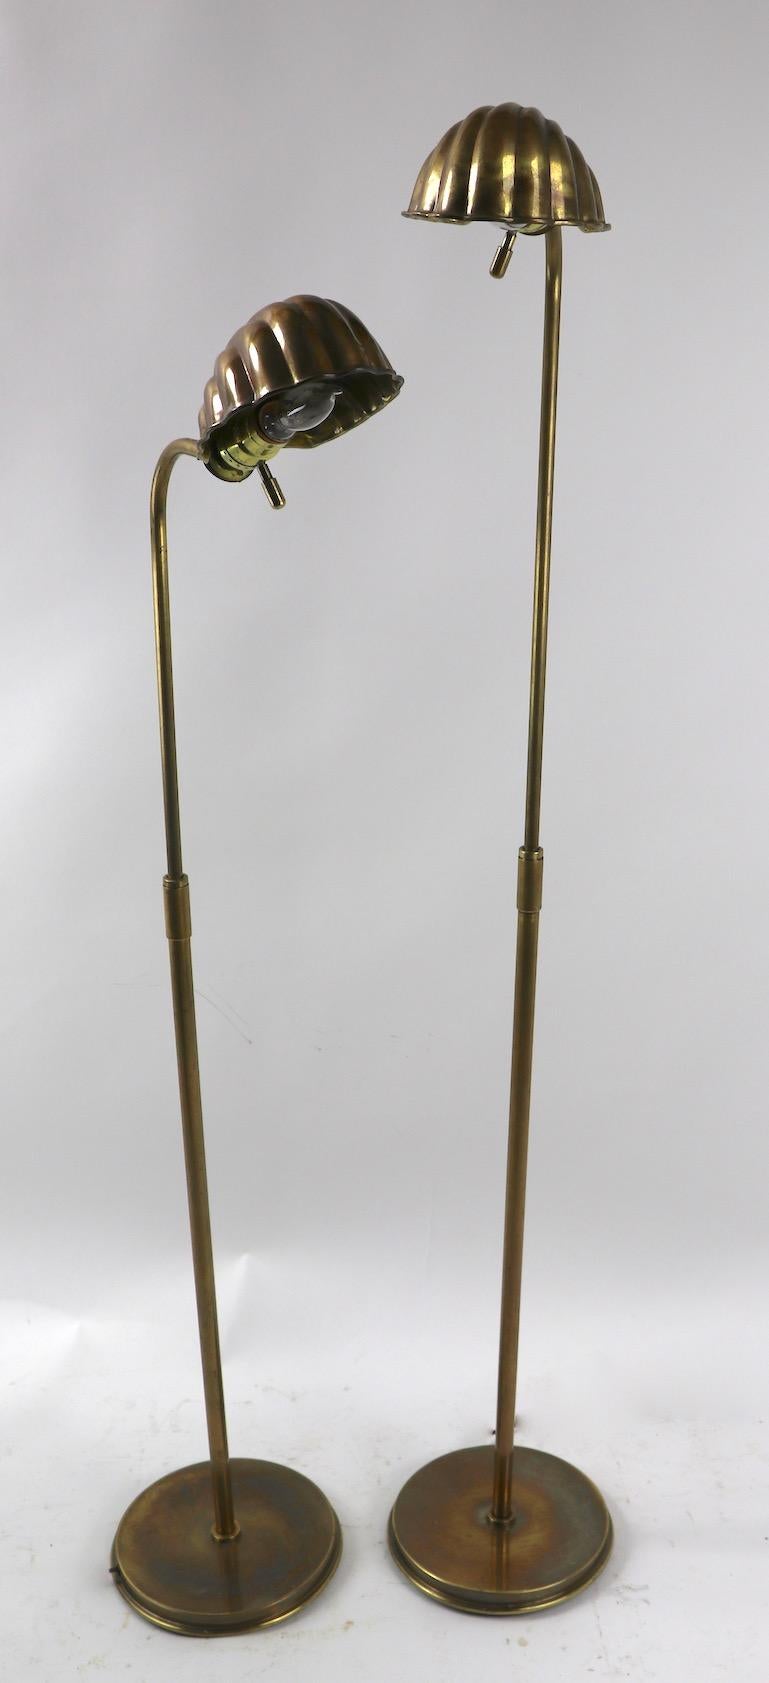 20th Century Pair of Adjustable Brass Shell Shade Floor Lamps